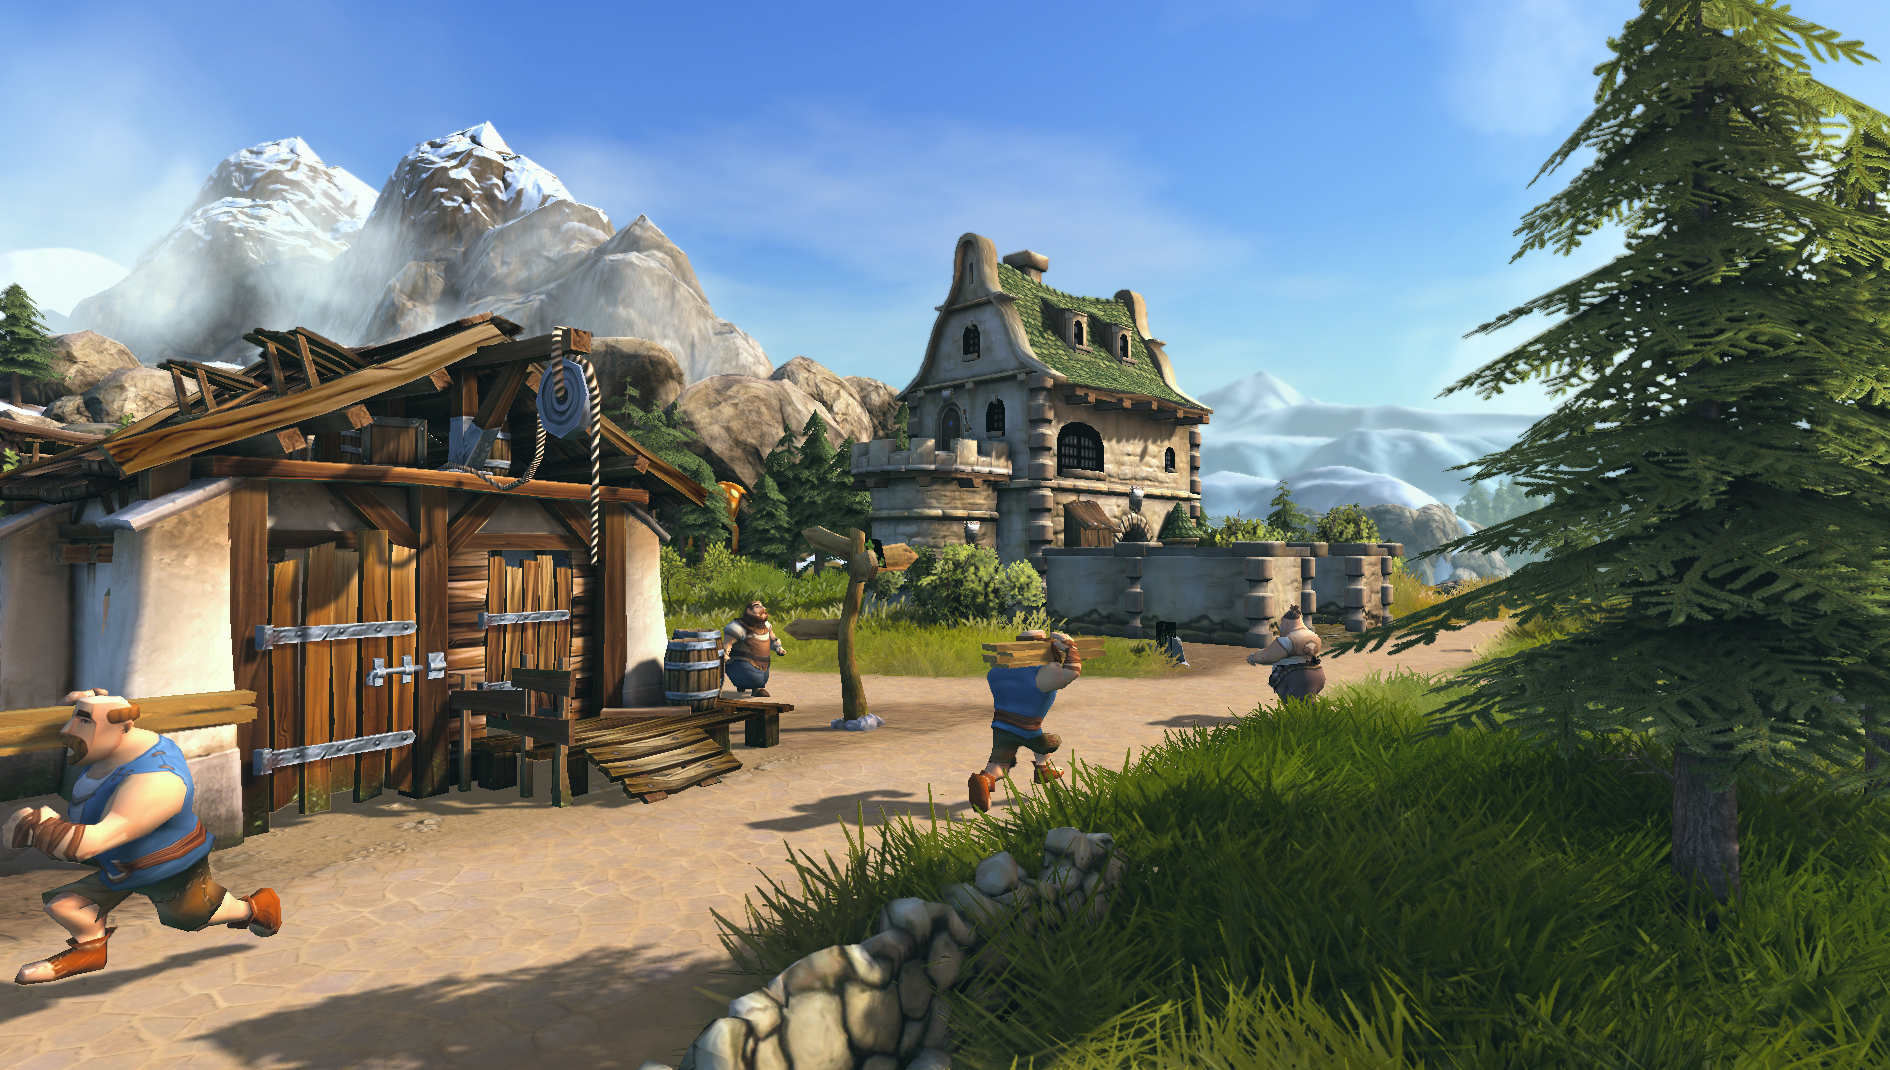 free download the settlers 7 paths to a kingdom steam